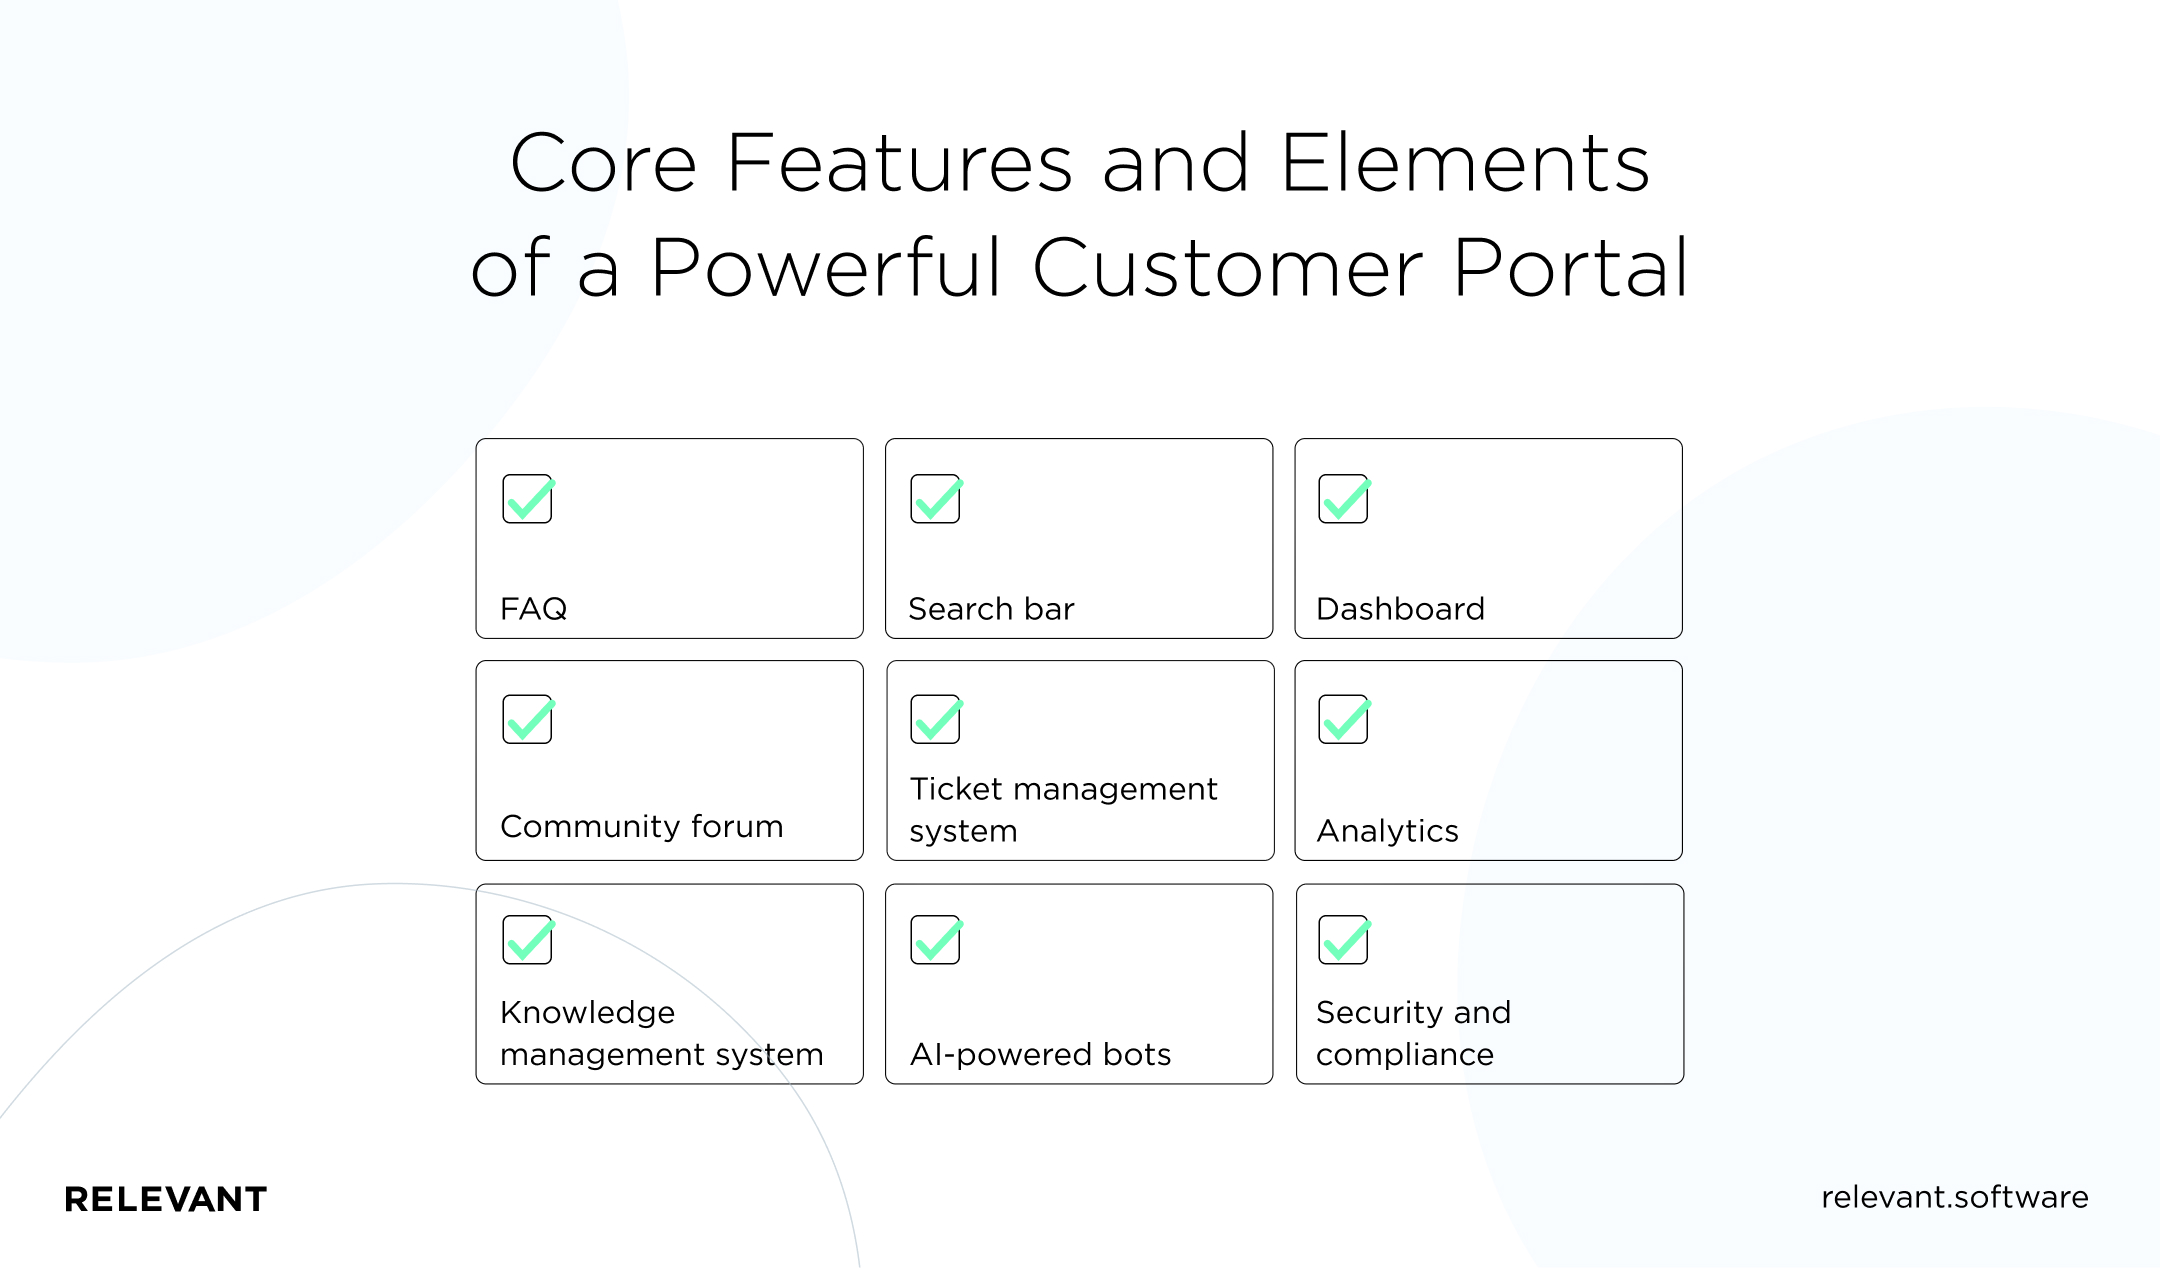 Core Features and Elements of a Powerful Customer Portal